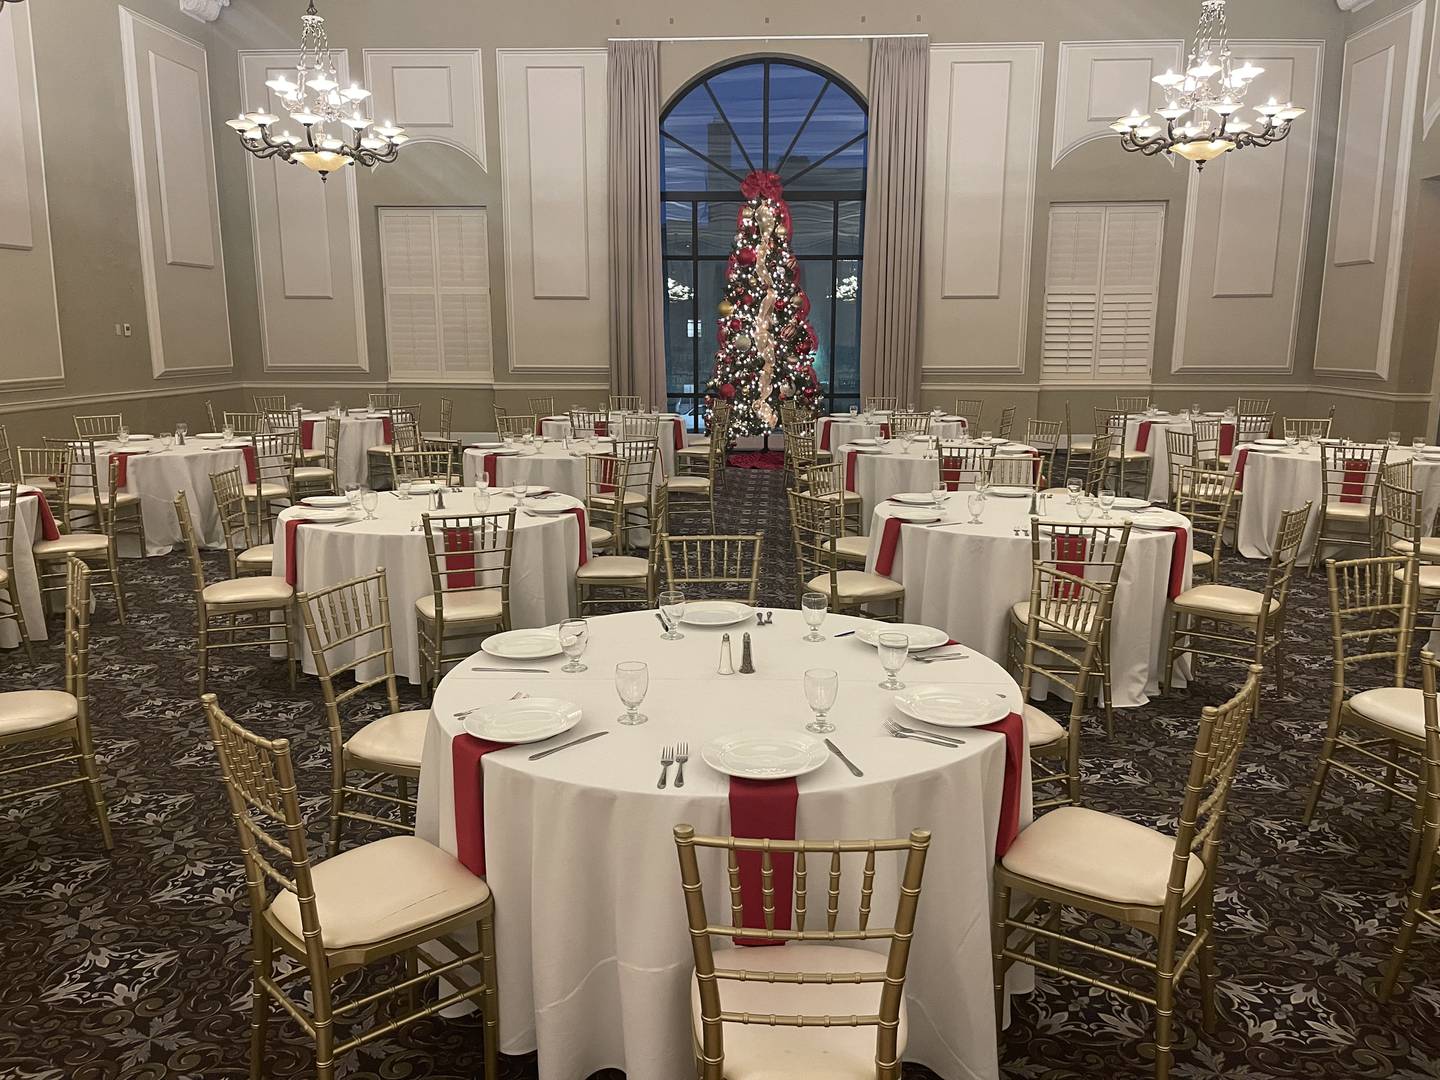 Renaissance Center in Joliet was voted one of the best banquet facilities in the 2021 Best of Will County Readers Choice awards. (Photo provided by Renaissance Center)